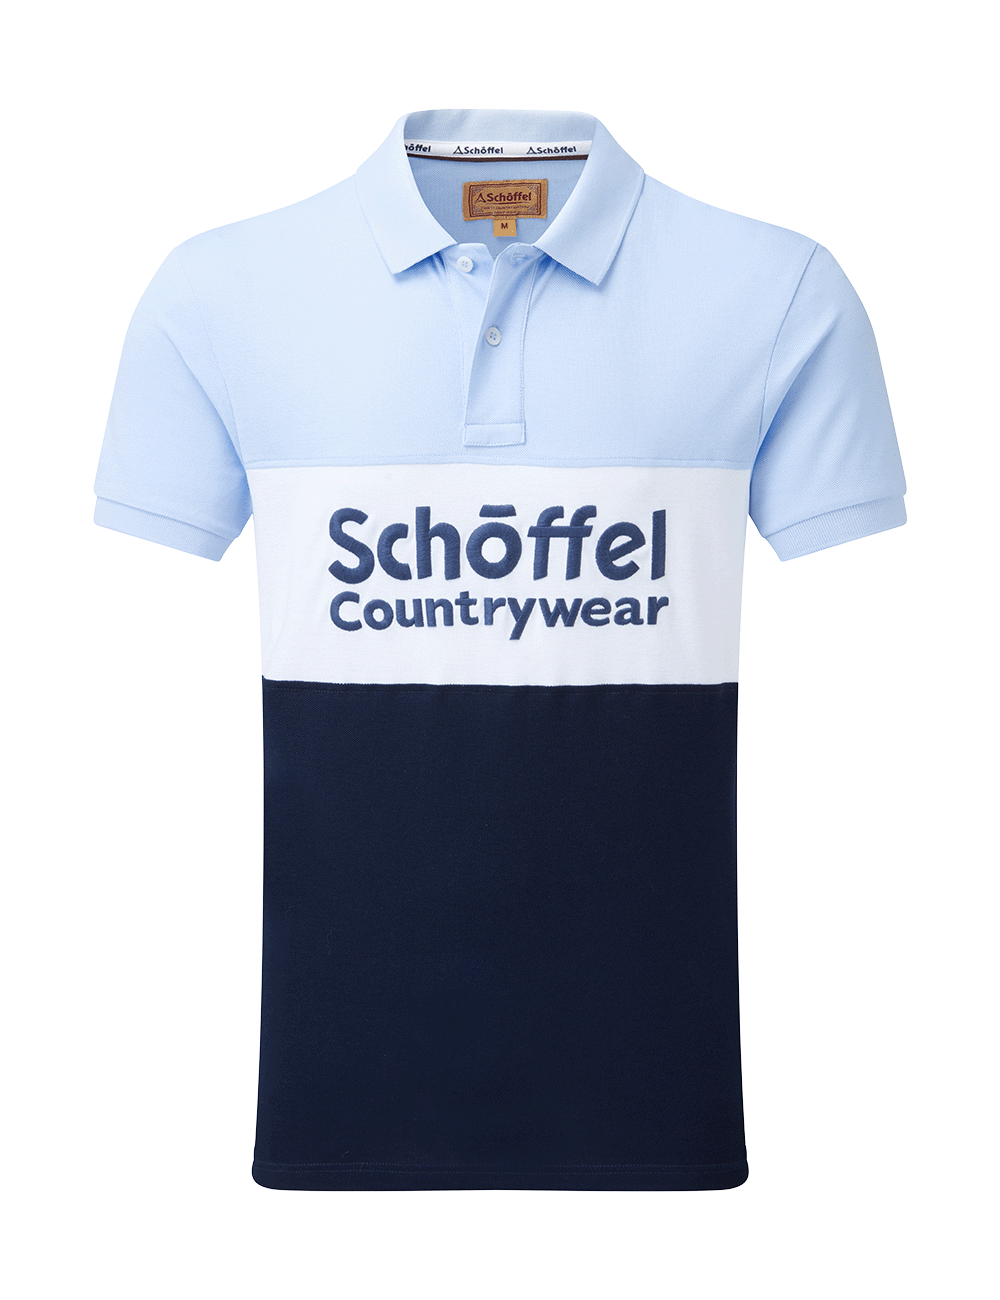 Schoffel Exeter Heritage Polo Shirt - Pale Blue